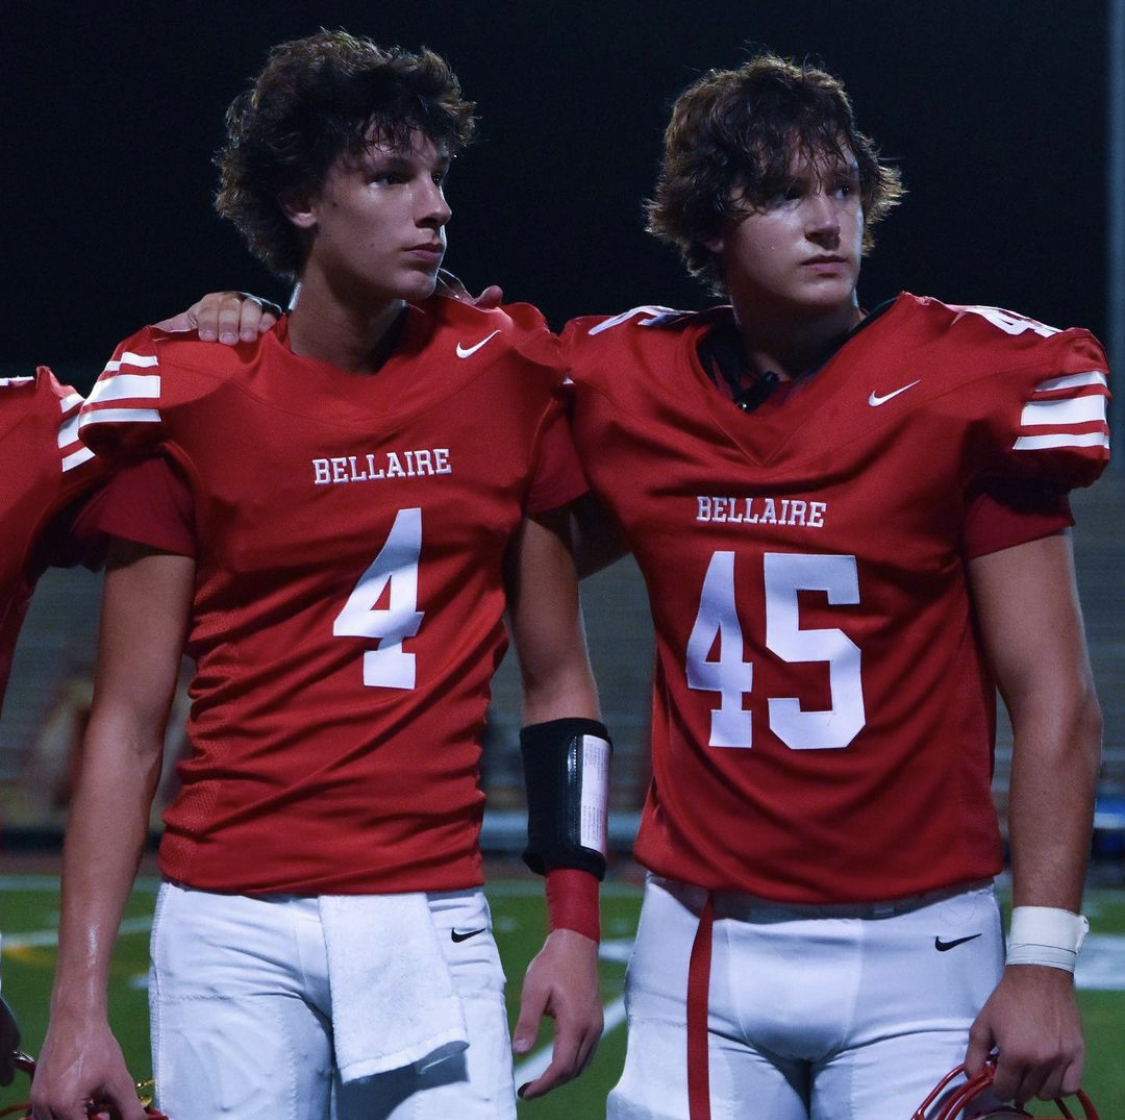 Brothers Will (left) and AJ (right) hugging during the Cardinal kick while the school song is played by the Mighty Cardinal Band. At the end of every game, the school song is played to show school pride and members of the cheer, football and Belles dance and sing together.